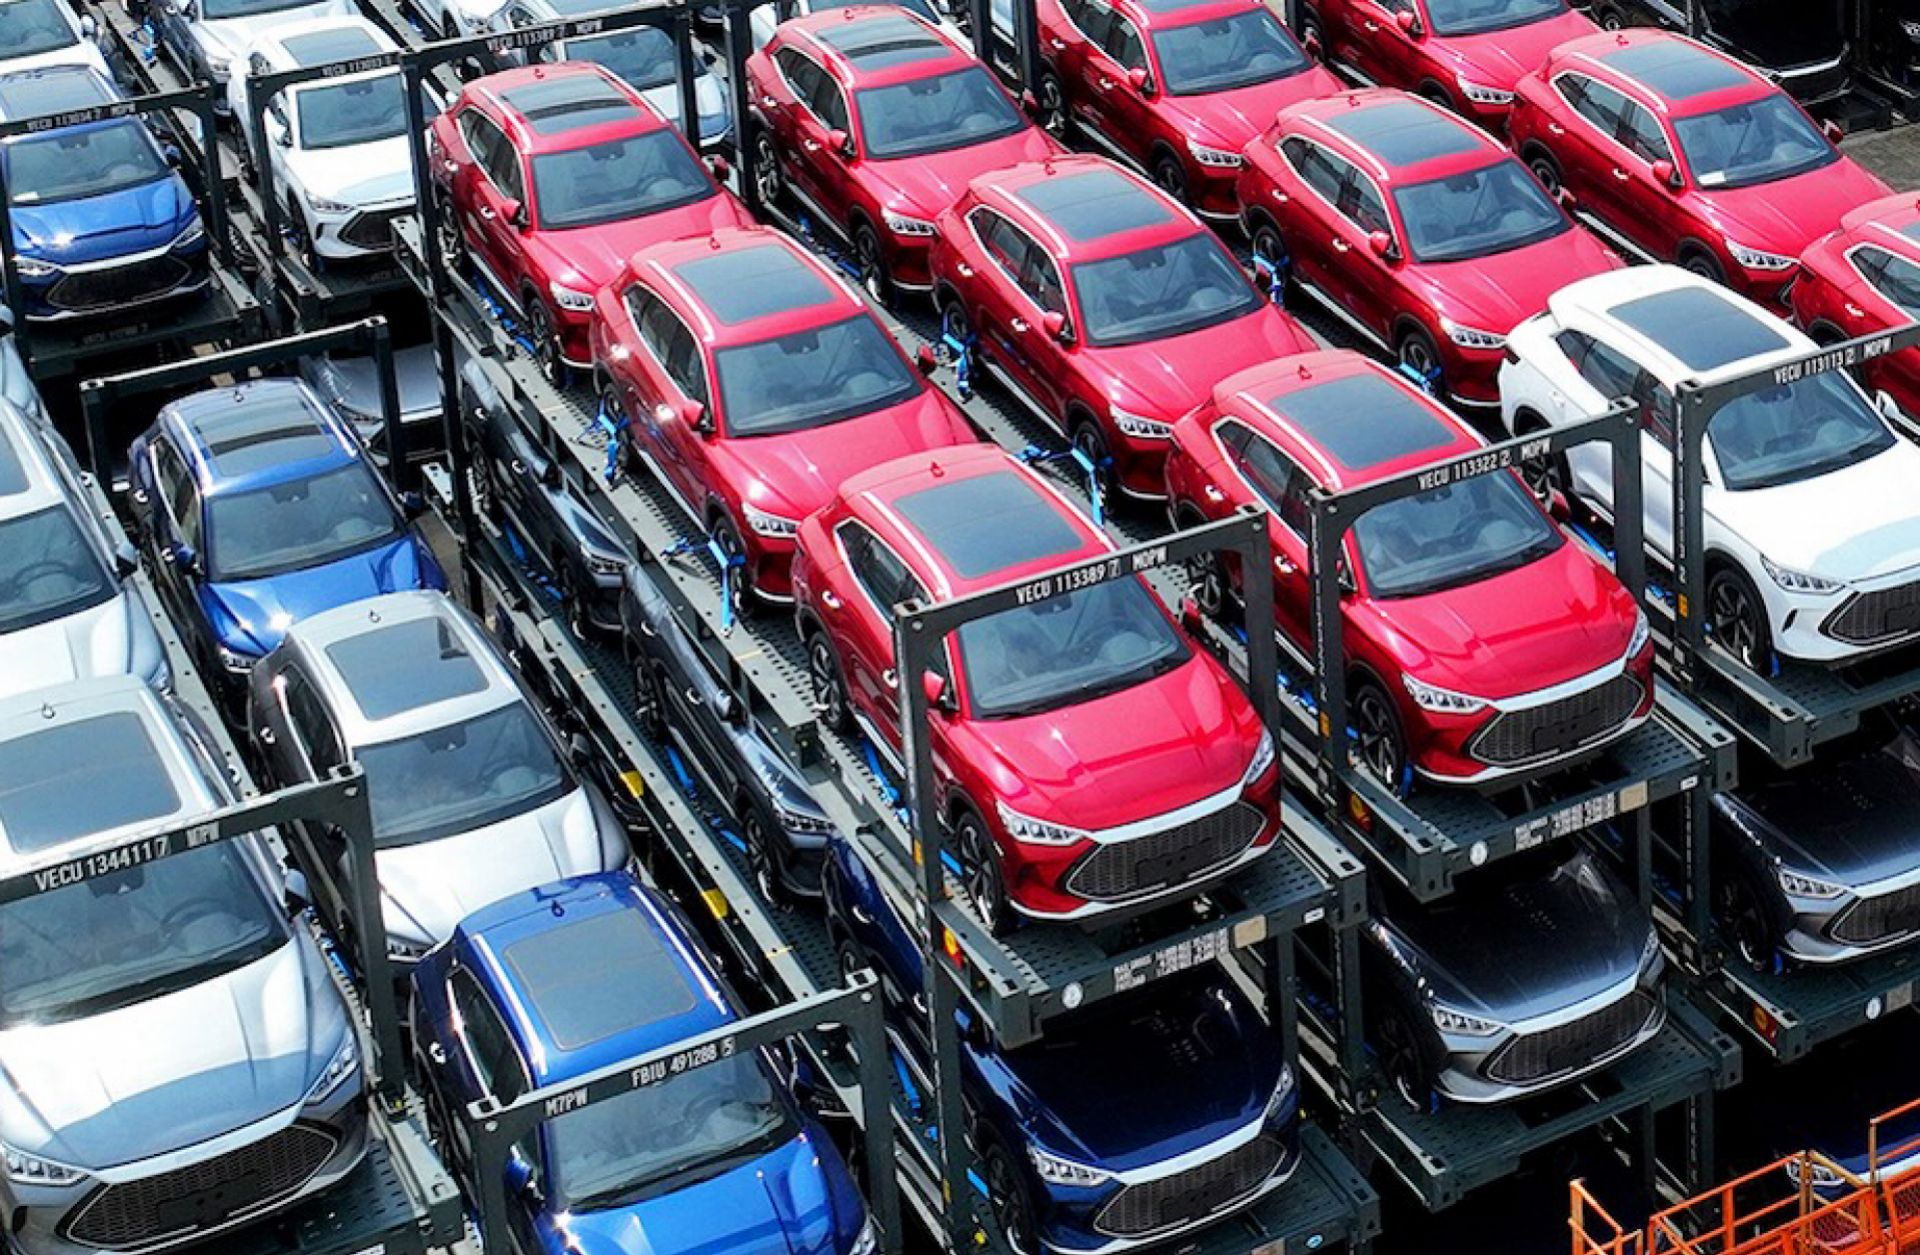 Chinese car manufacturer BYD's stacked electric vehicles wait to be loaded onto a ship at the international container terminal of Taicang Port at Suzhou Port in China's eastern Jiangsu province on Sept. 11, 2023.